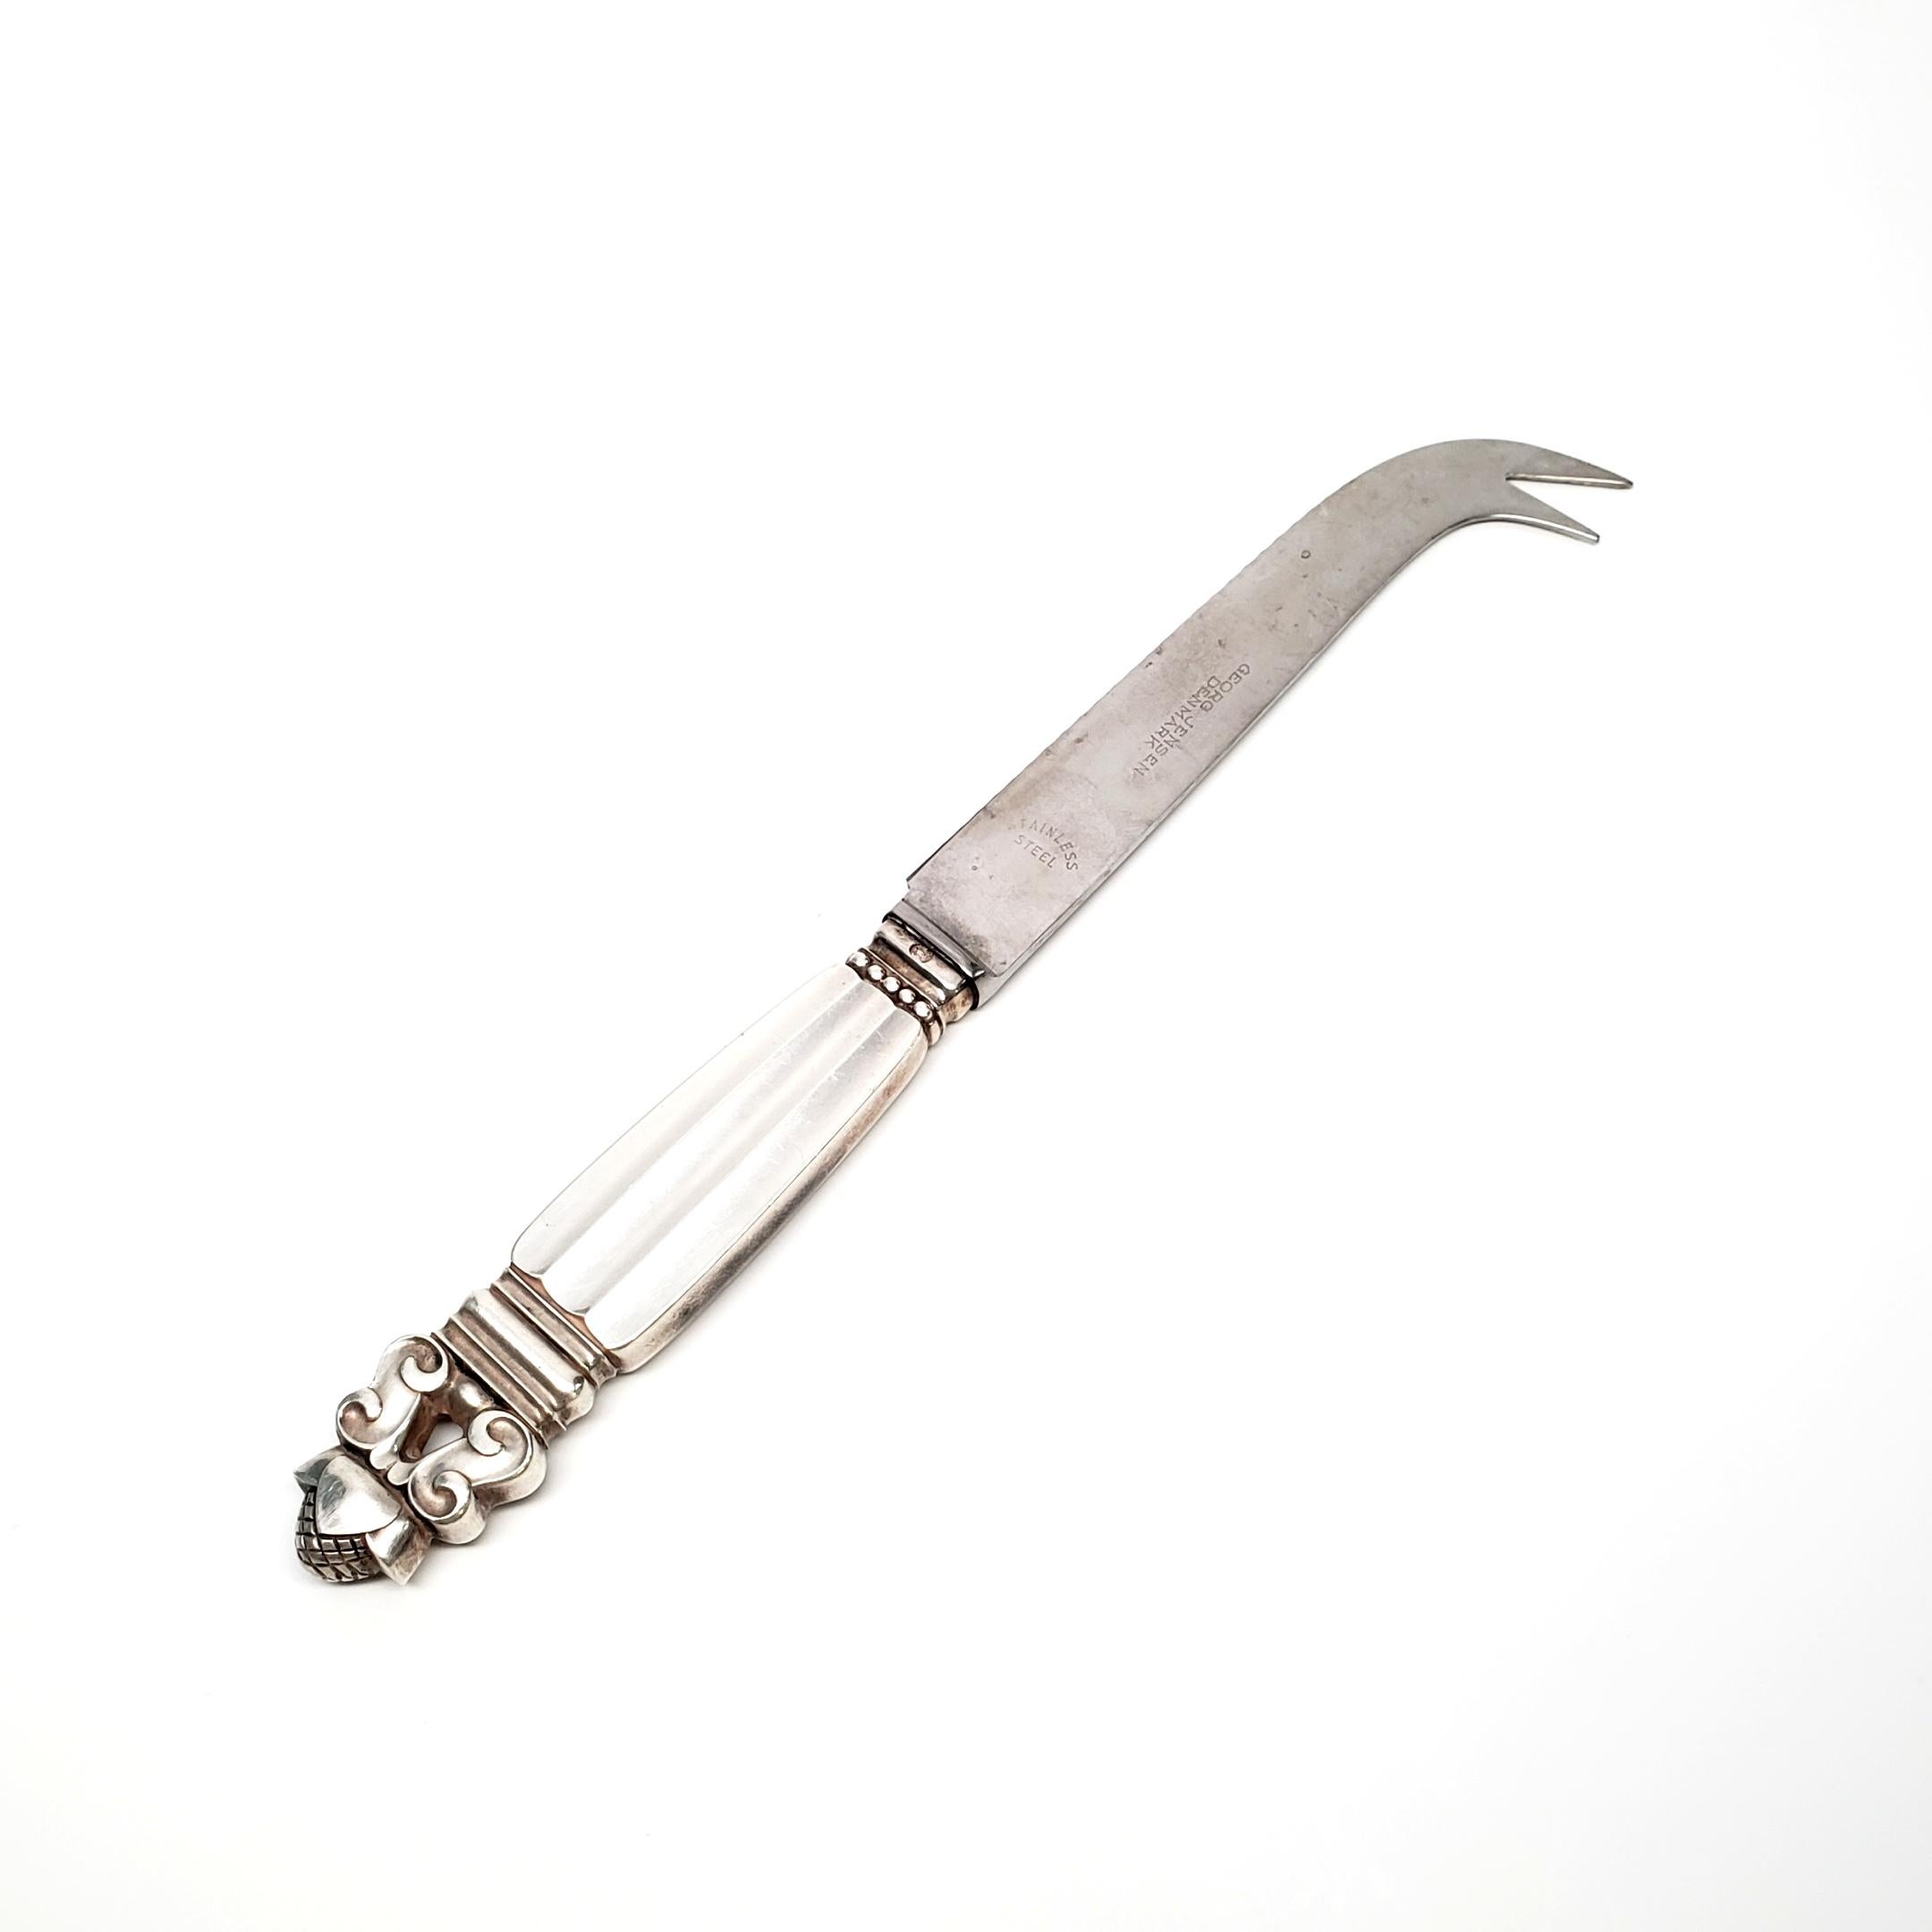 Vintage sterling silver cheese/bar knife from Georg Jensen in the Acorn pattern.

The Acorn pattern was introduced in 1915 as a collaboration between Georg Jensen and designer Johan Ronde. The acorn pattern, which combines the Art Nouveau and Art